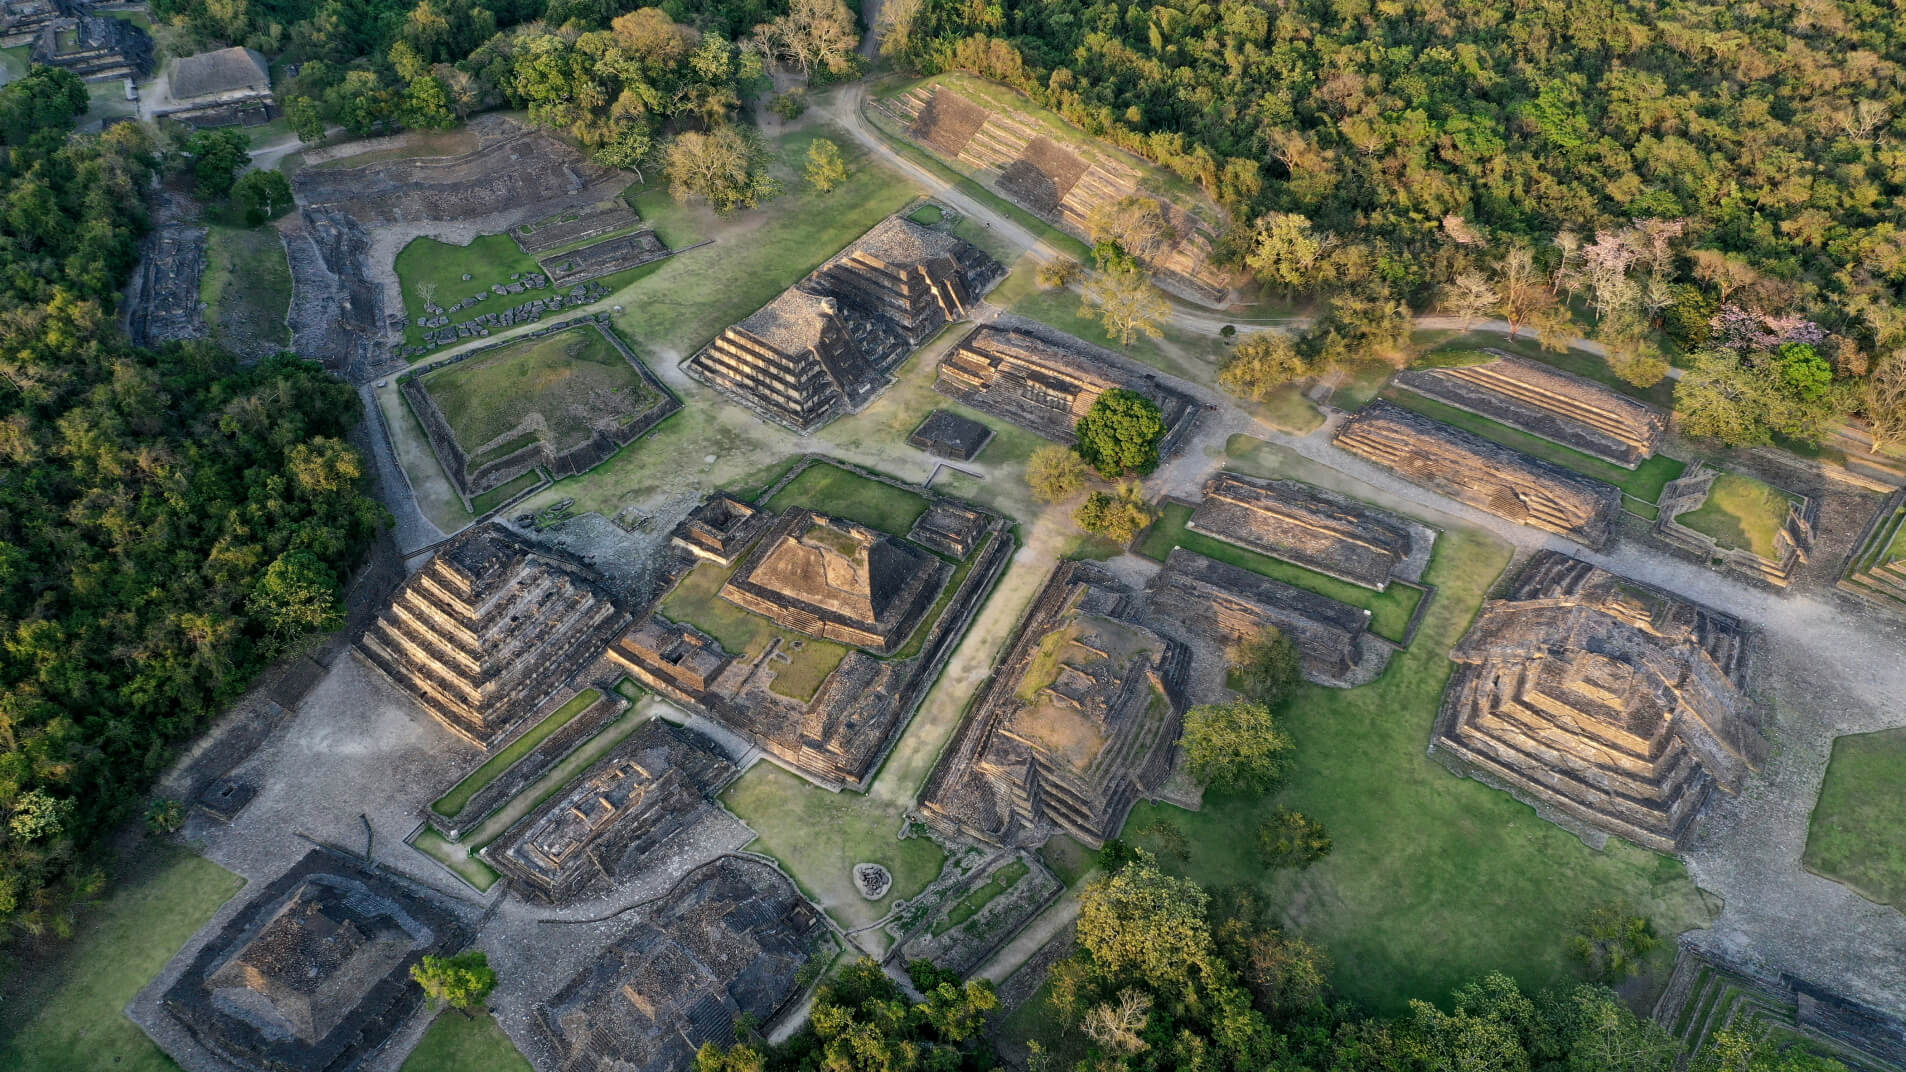 The architecture of El Tajín demonstrates advanced engineering techniques, such as the precise alignment of buildings with astronomical events like solstices and equinoxes. iStock